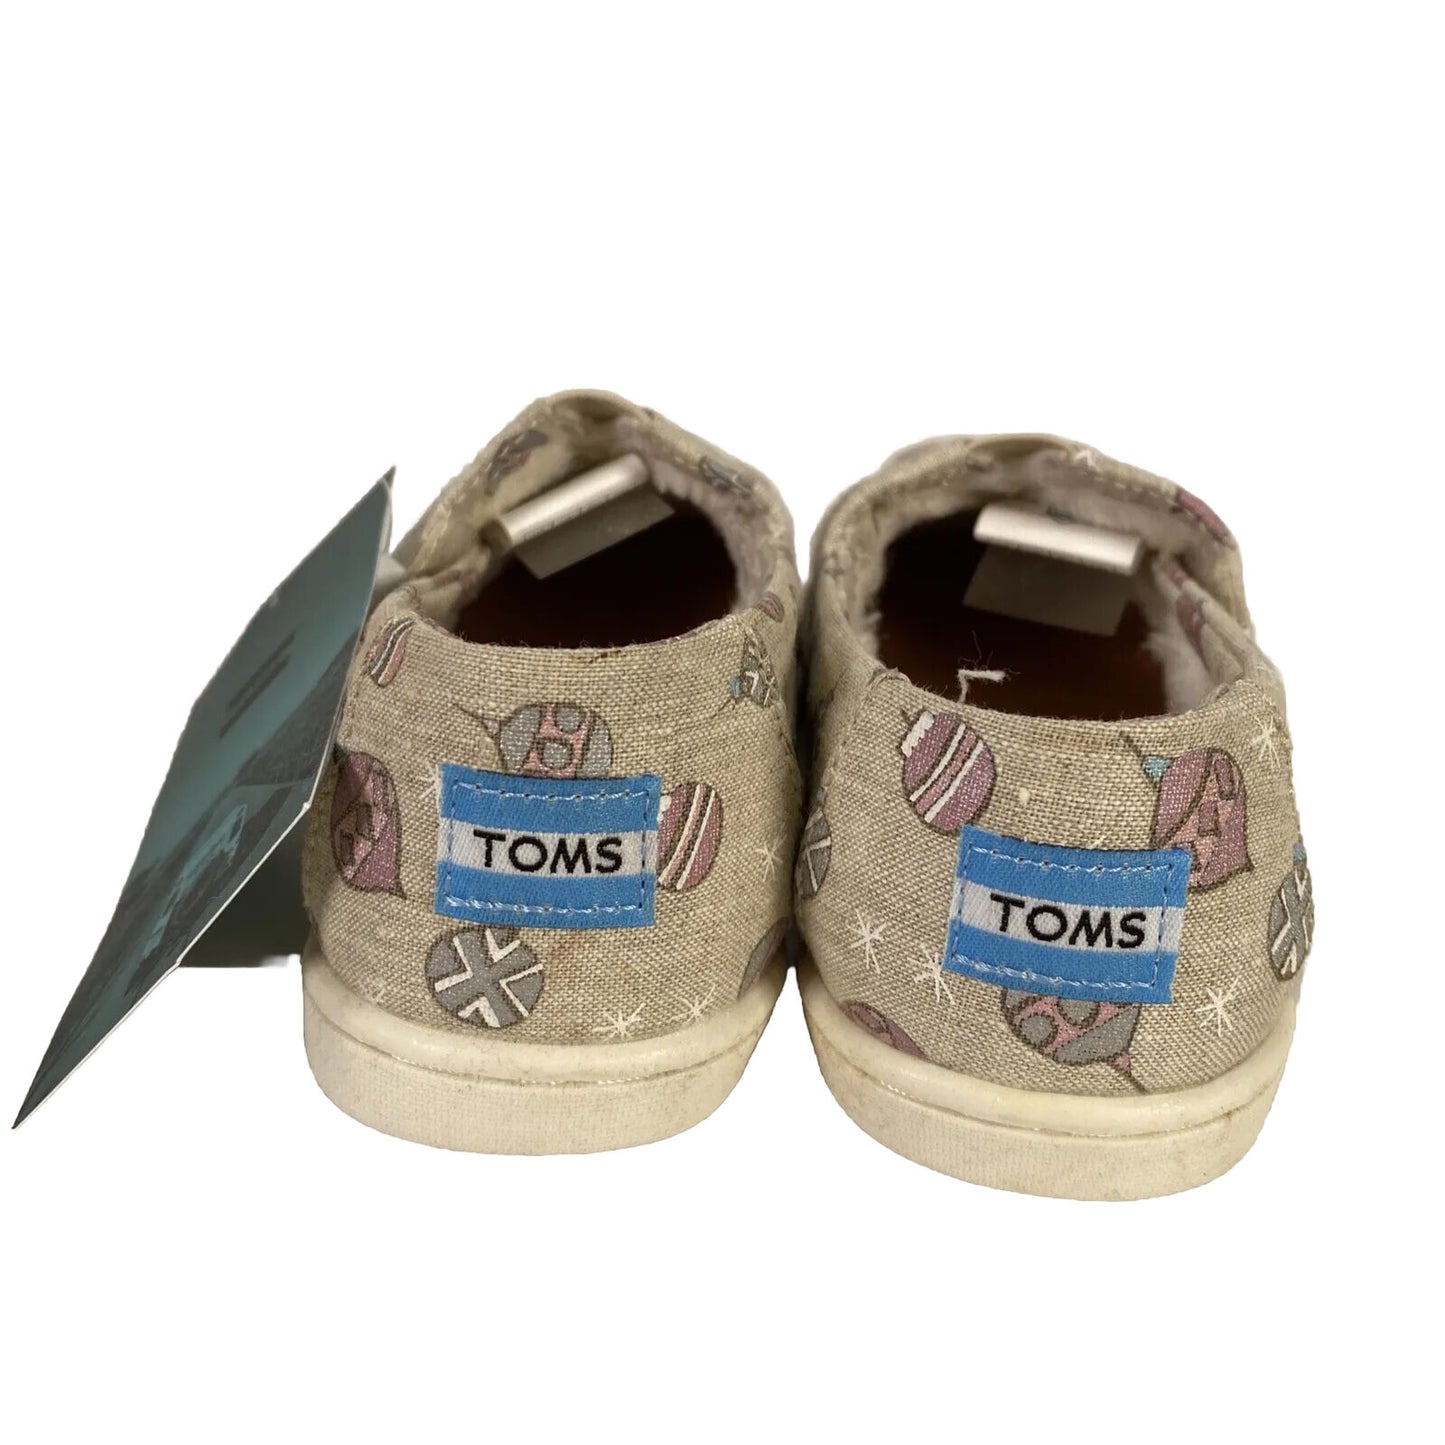 NEW Toms Tiny  Toddler Girls Gray Sparkle Ornament Print Woven Loafers - 10